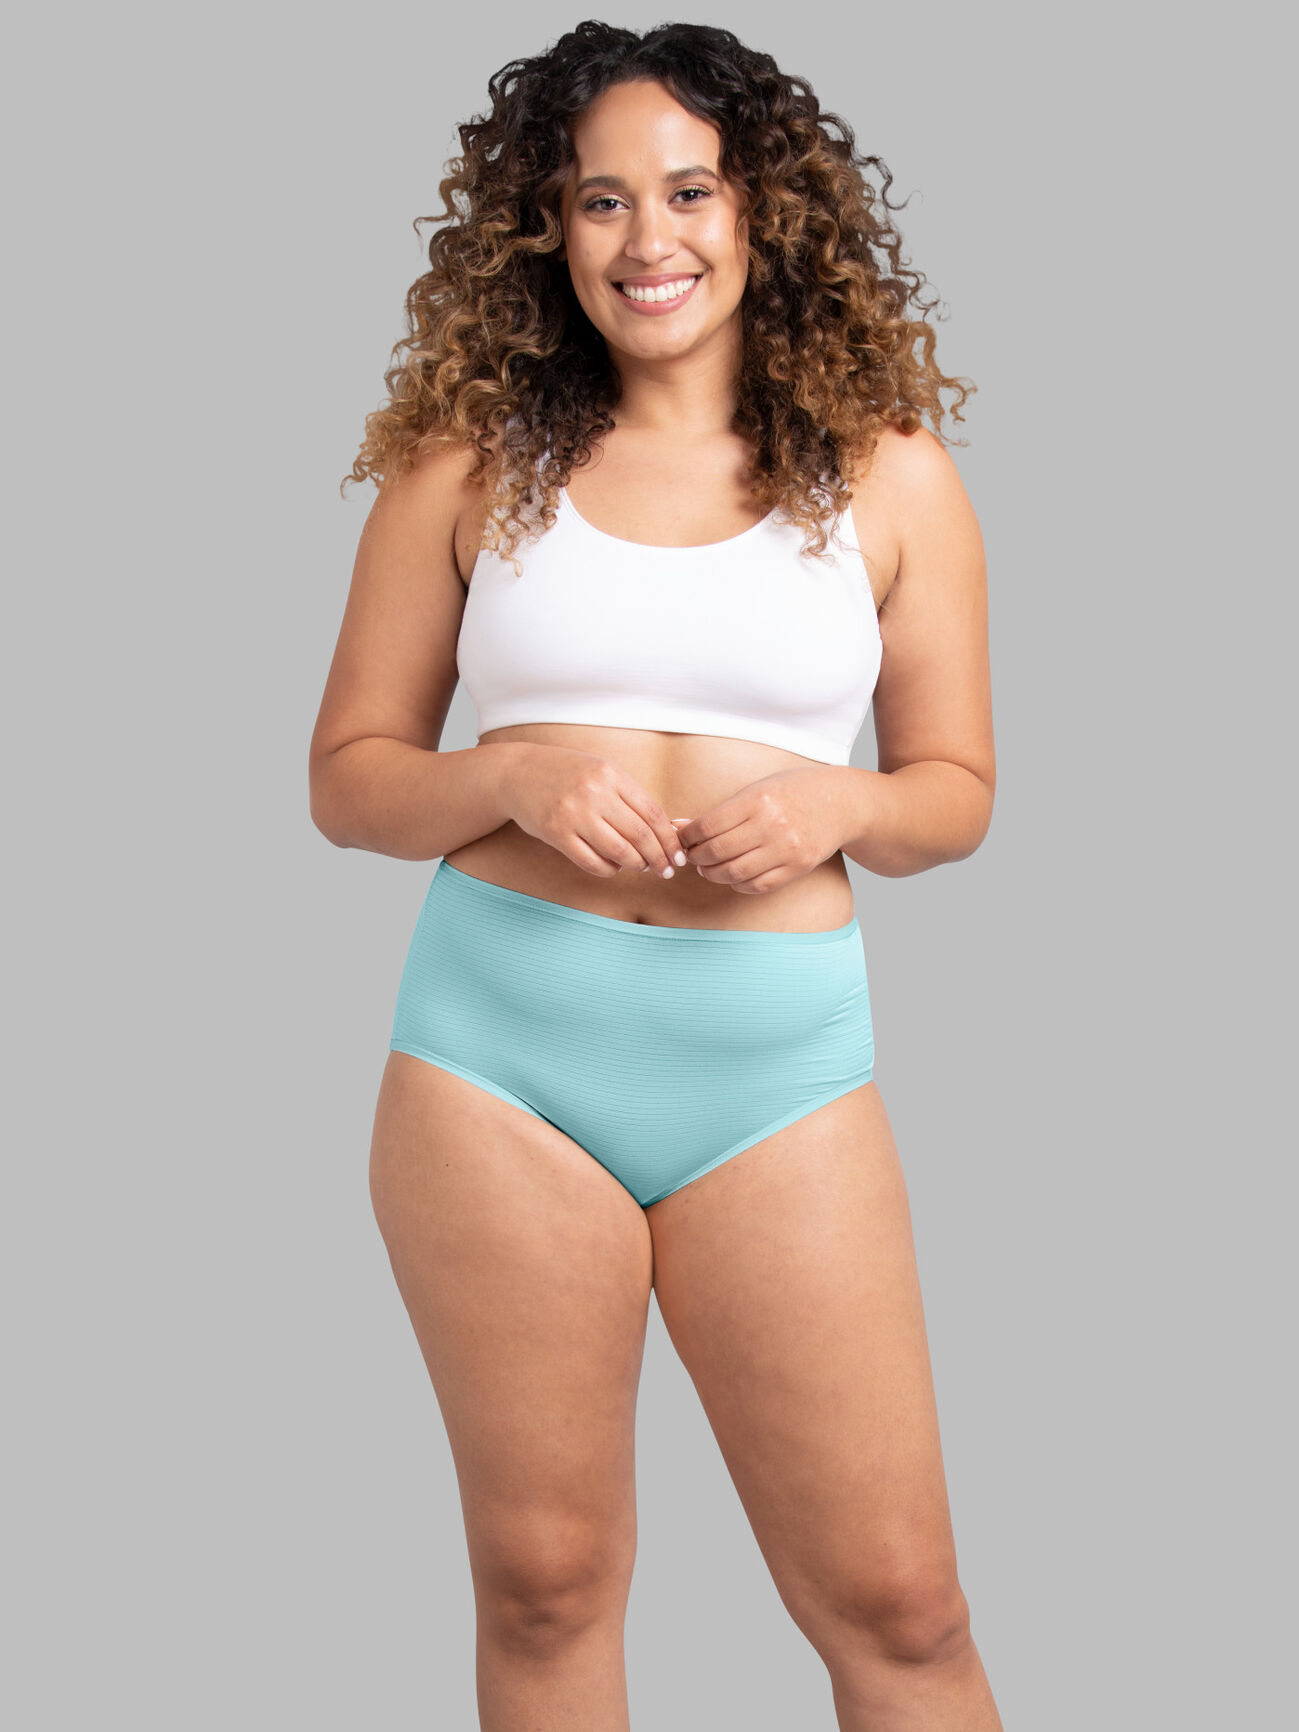  Fruit Of The Loom Womens Breathable Underwear, Moisture  Wicking Keeps Comfortable, Available In Plus Size, Cooling  Stripes-Hipster-6 Pack-Colors May Vary, 8